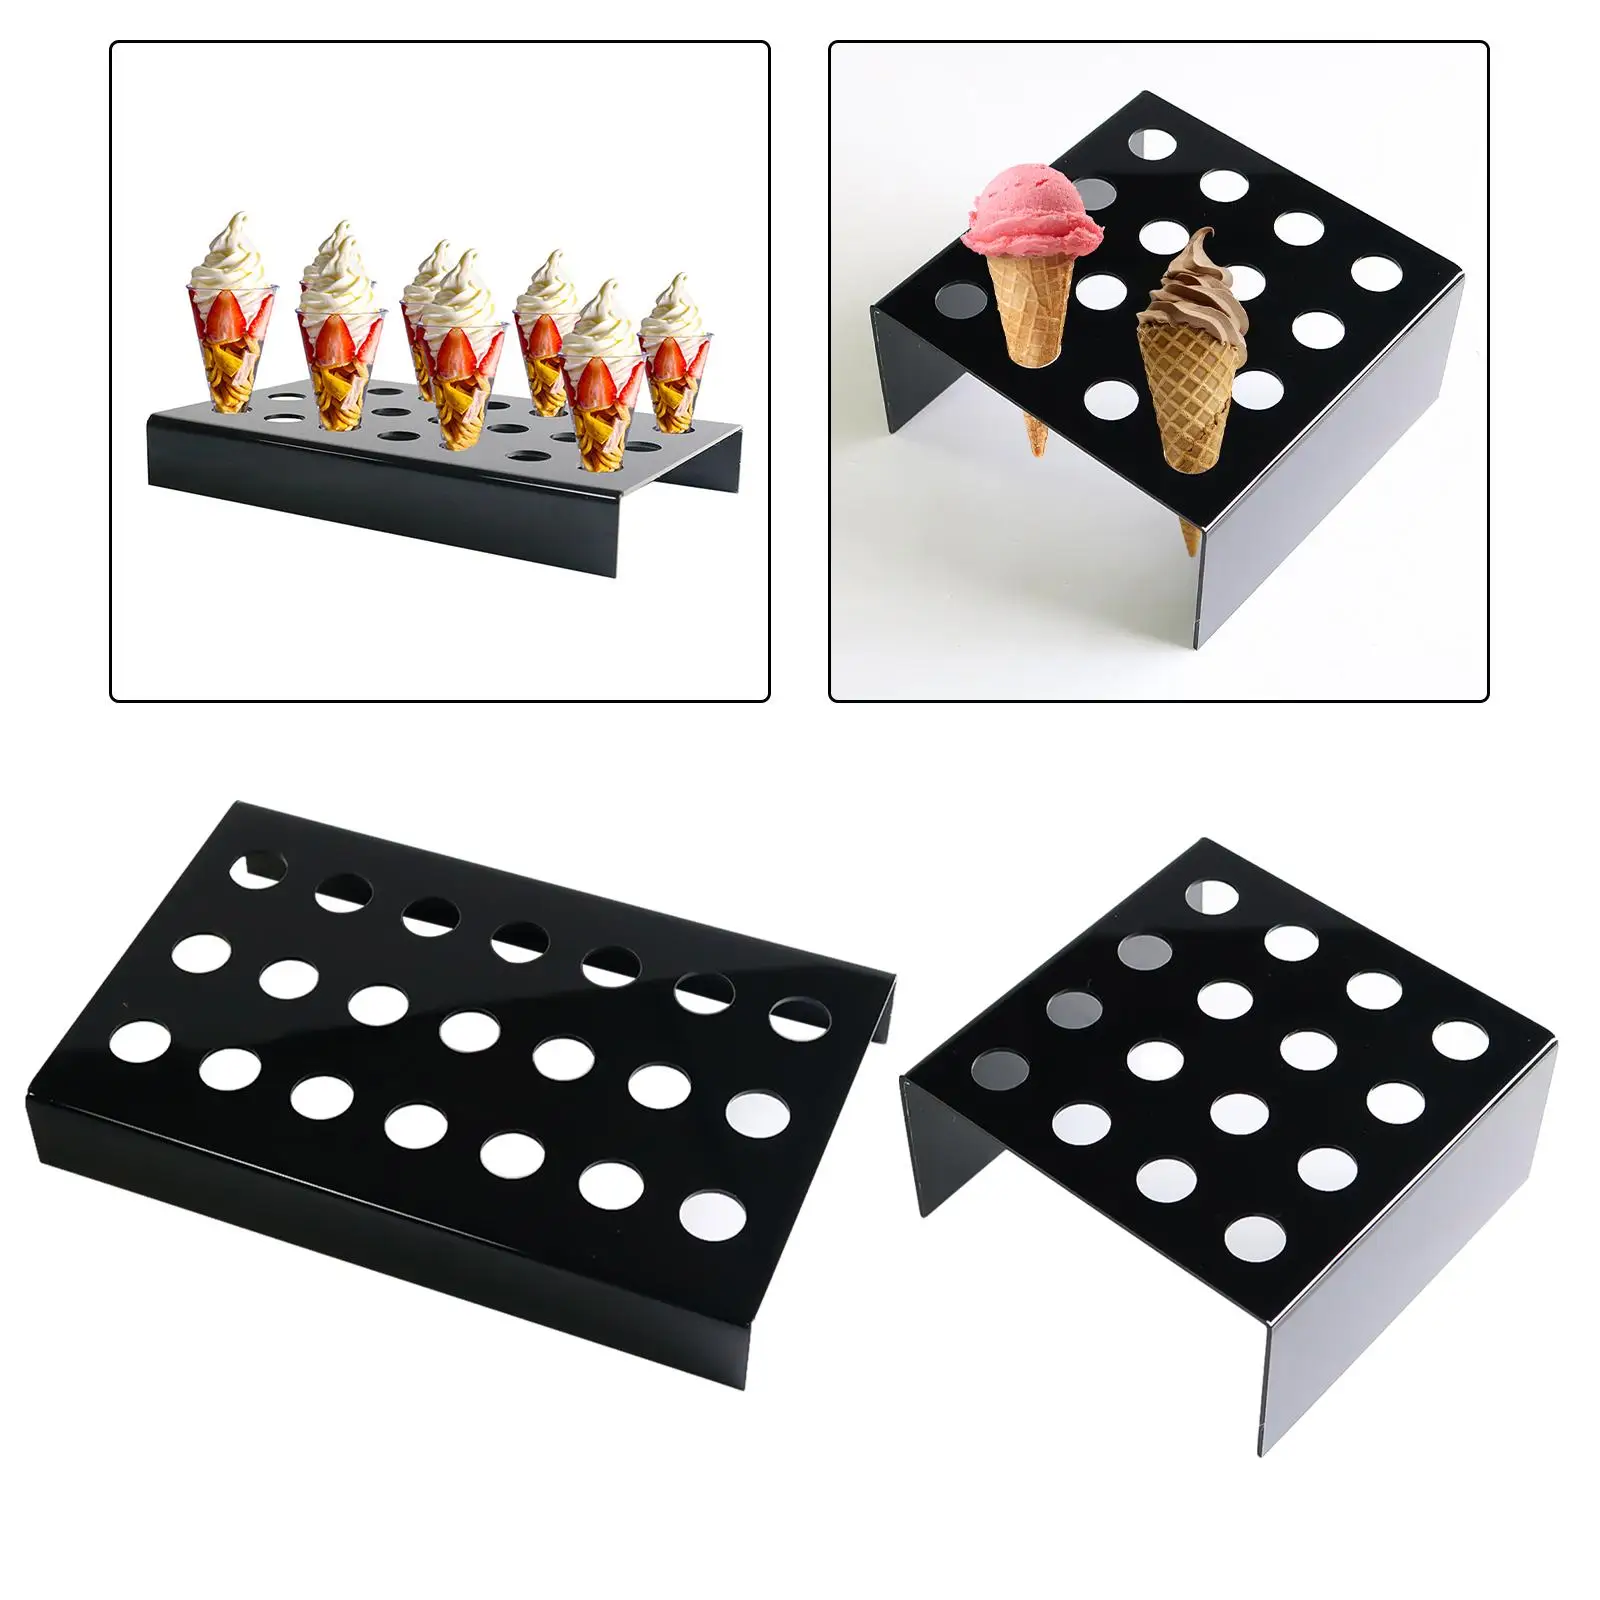 Ice Cream Cone Stand Tool Acrylic Supplies Cupcake Cones Baking Rack Cupcakes Holder for Cooking Wedding Kitchen Home Baking